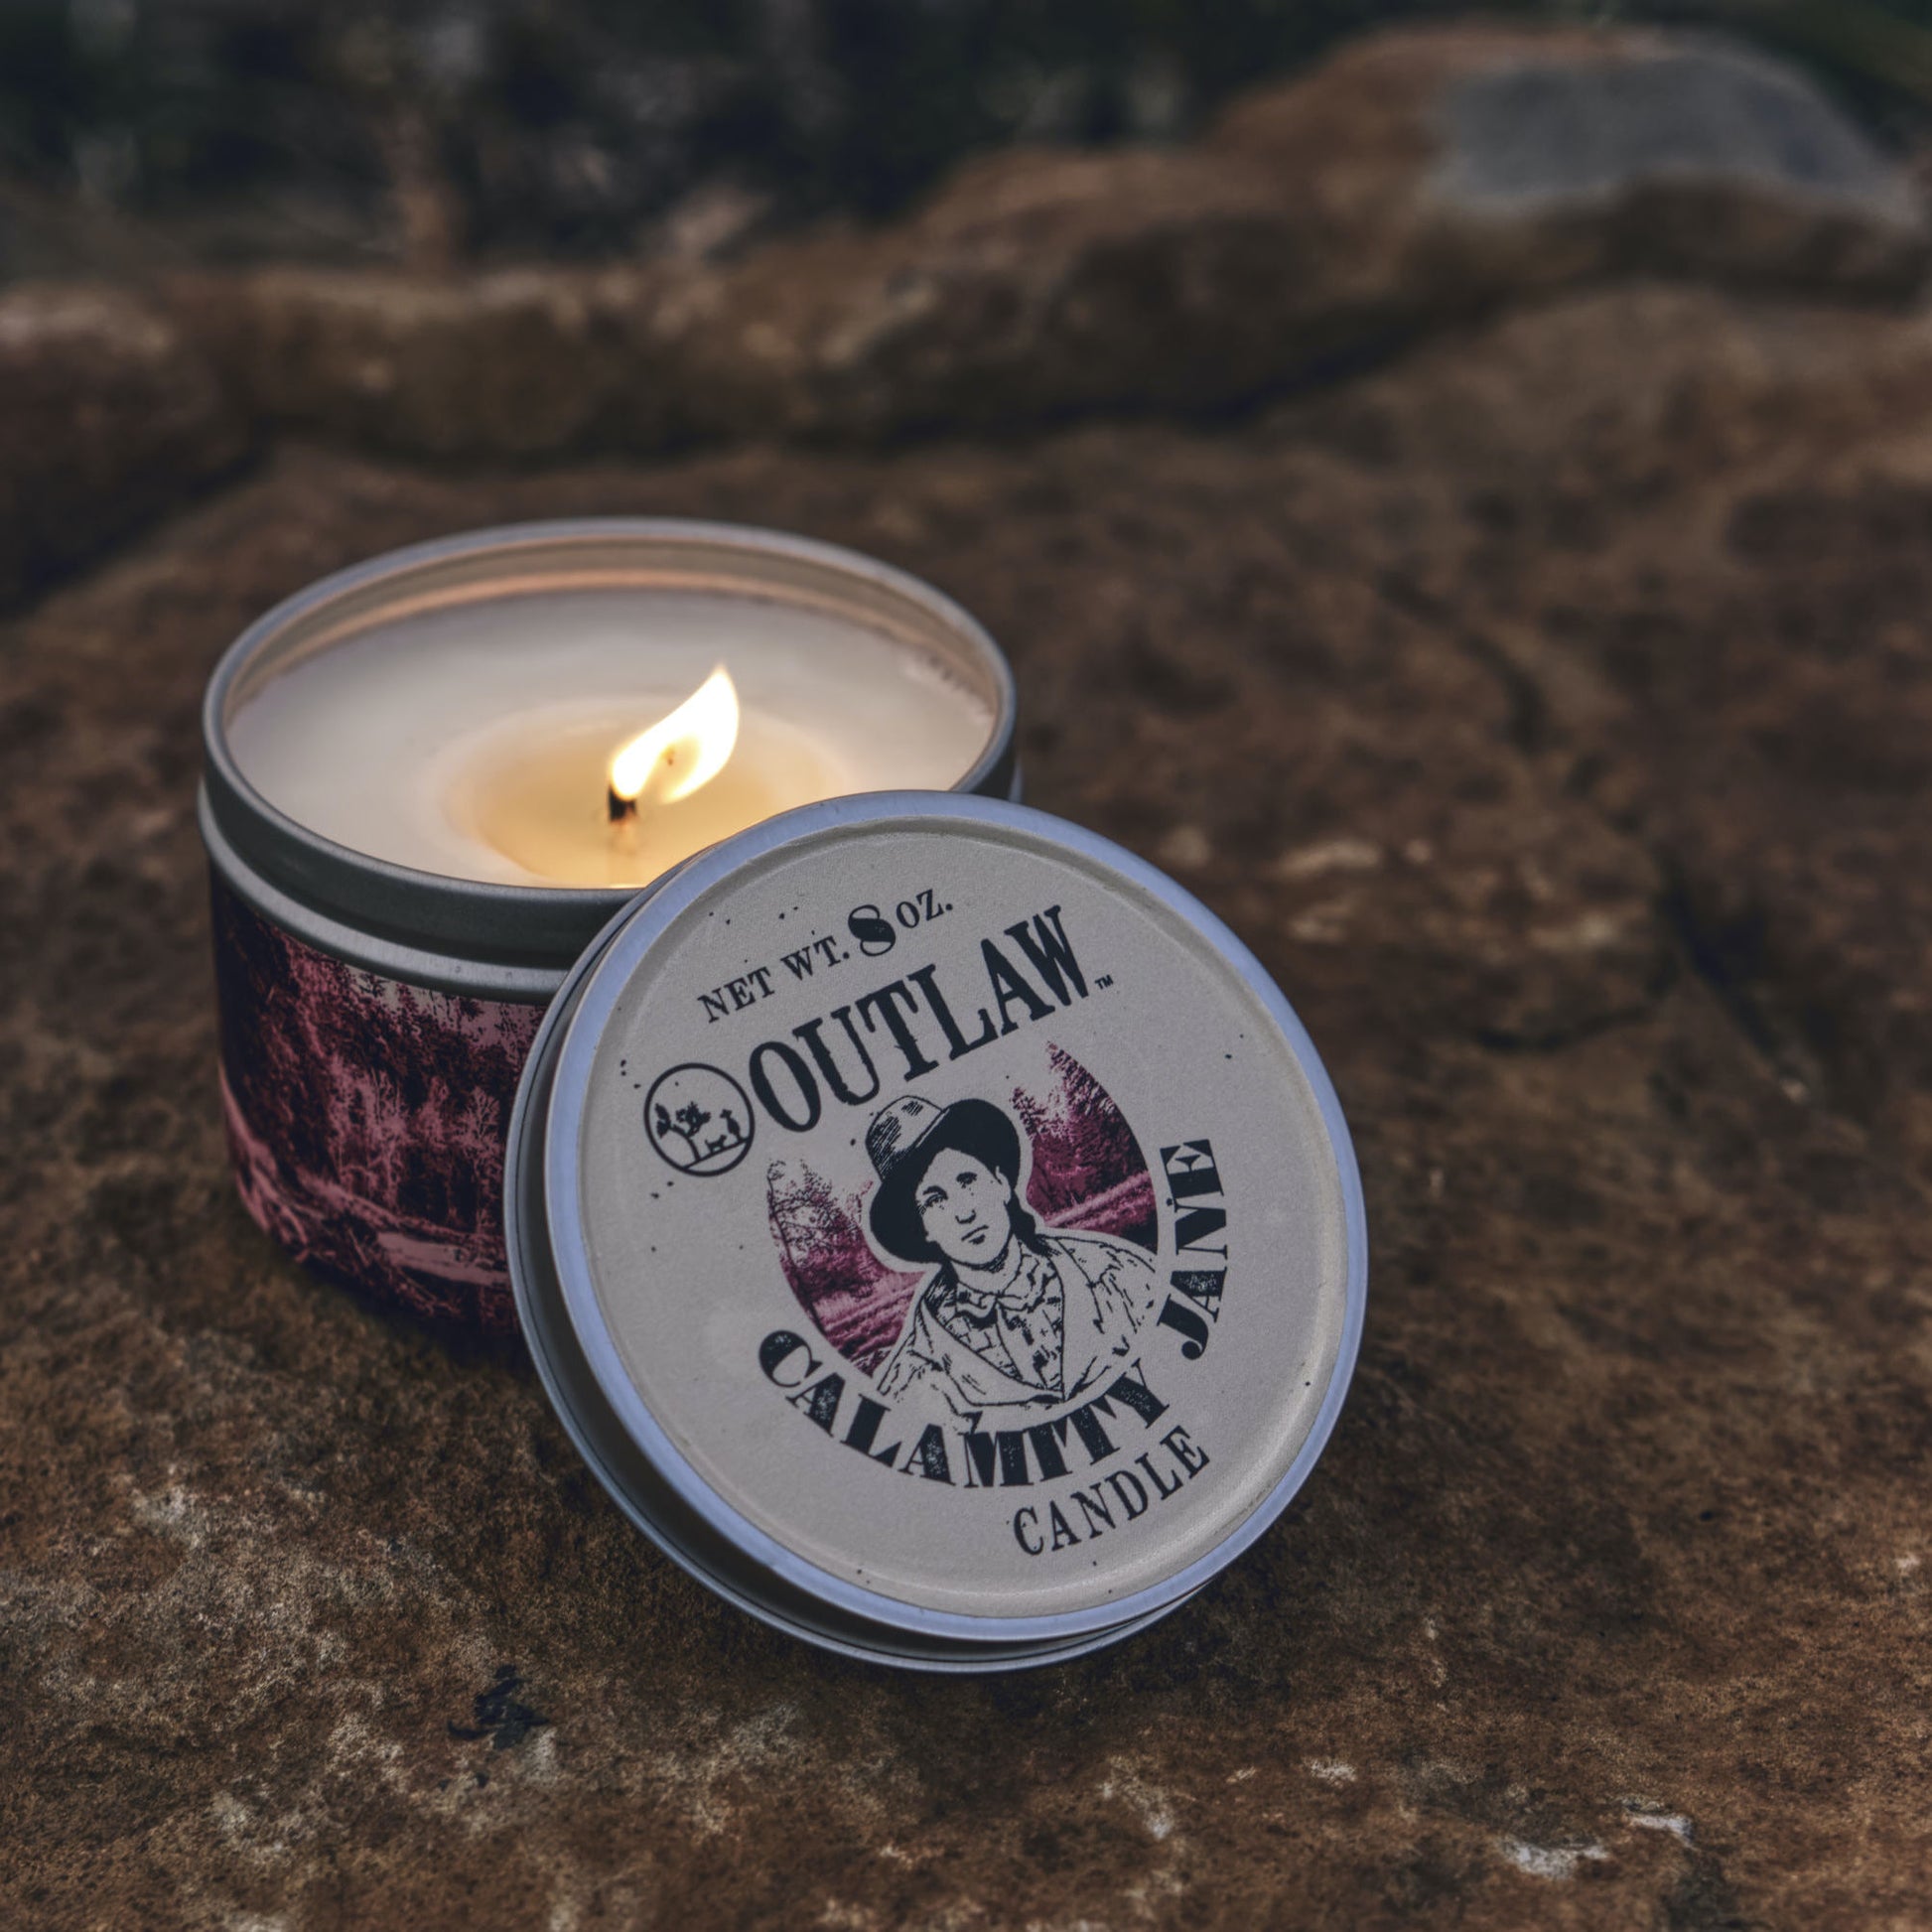 Outlaw Calamity Jane Candle